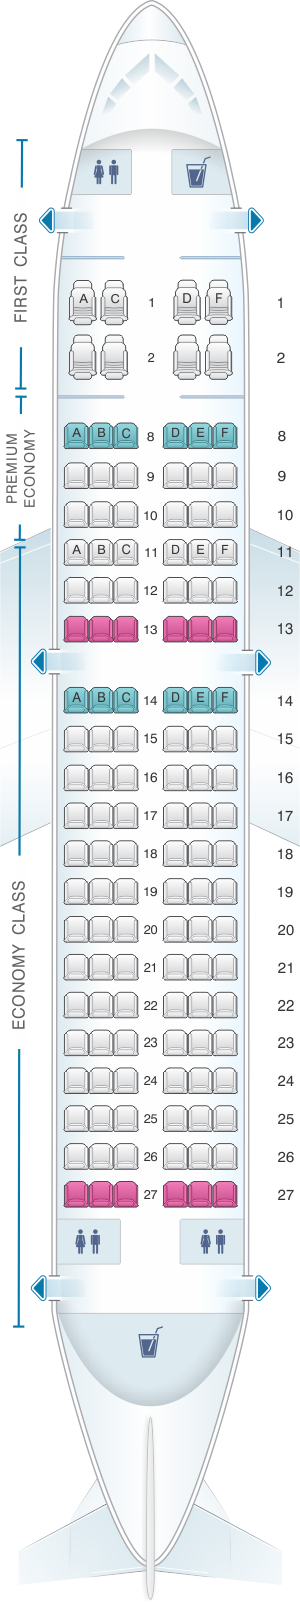 Seat Map American Airlines Airbus A319 128pax